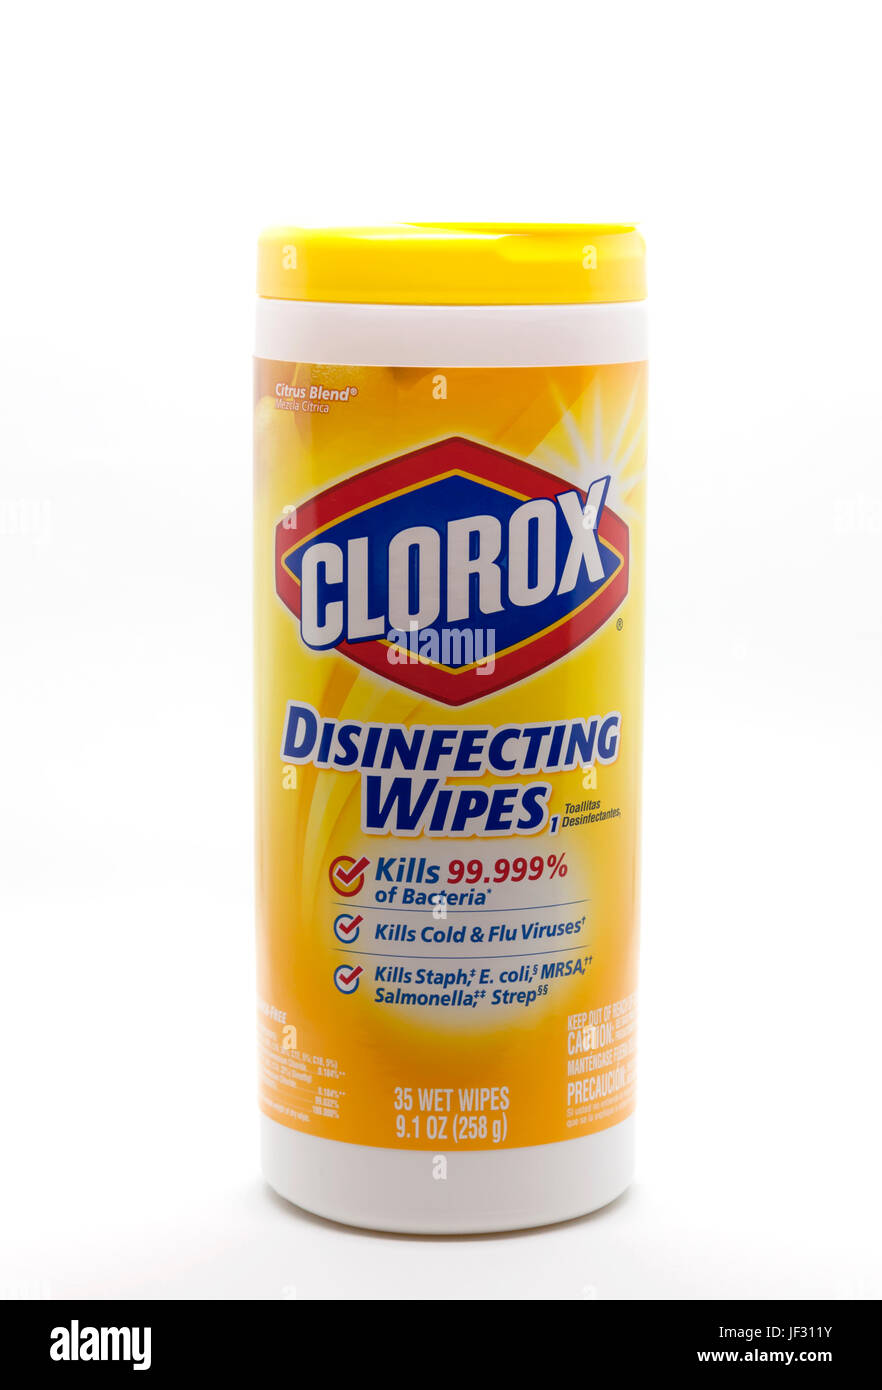 Clorox Disinfecting Wipes in a container which cleans, disinfects, and kills germs and bacteria. Stock Photo